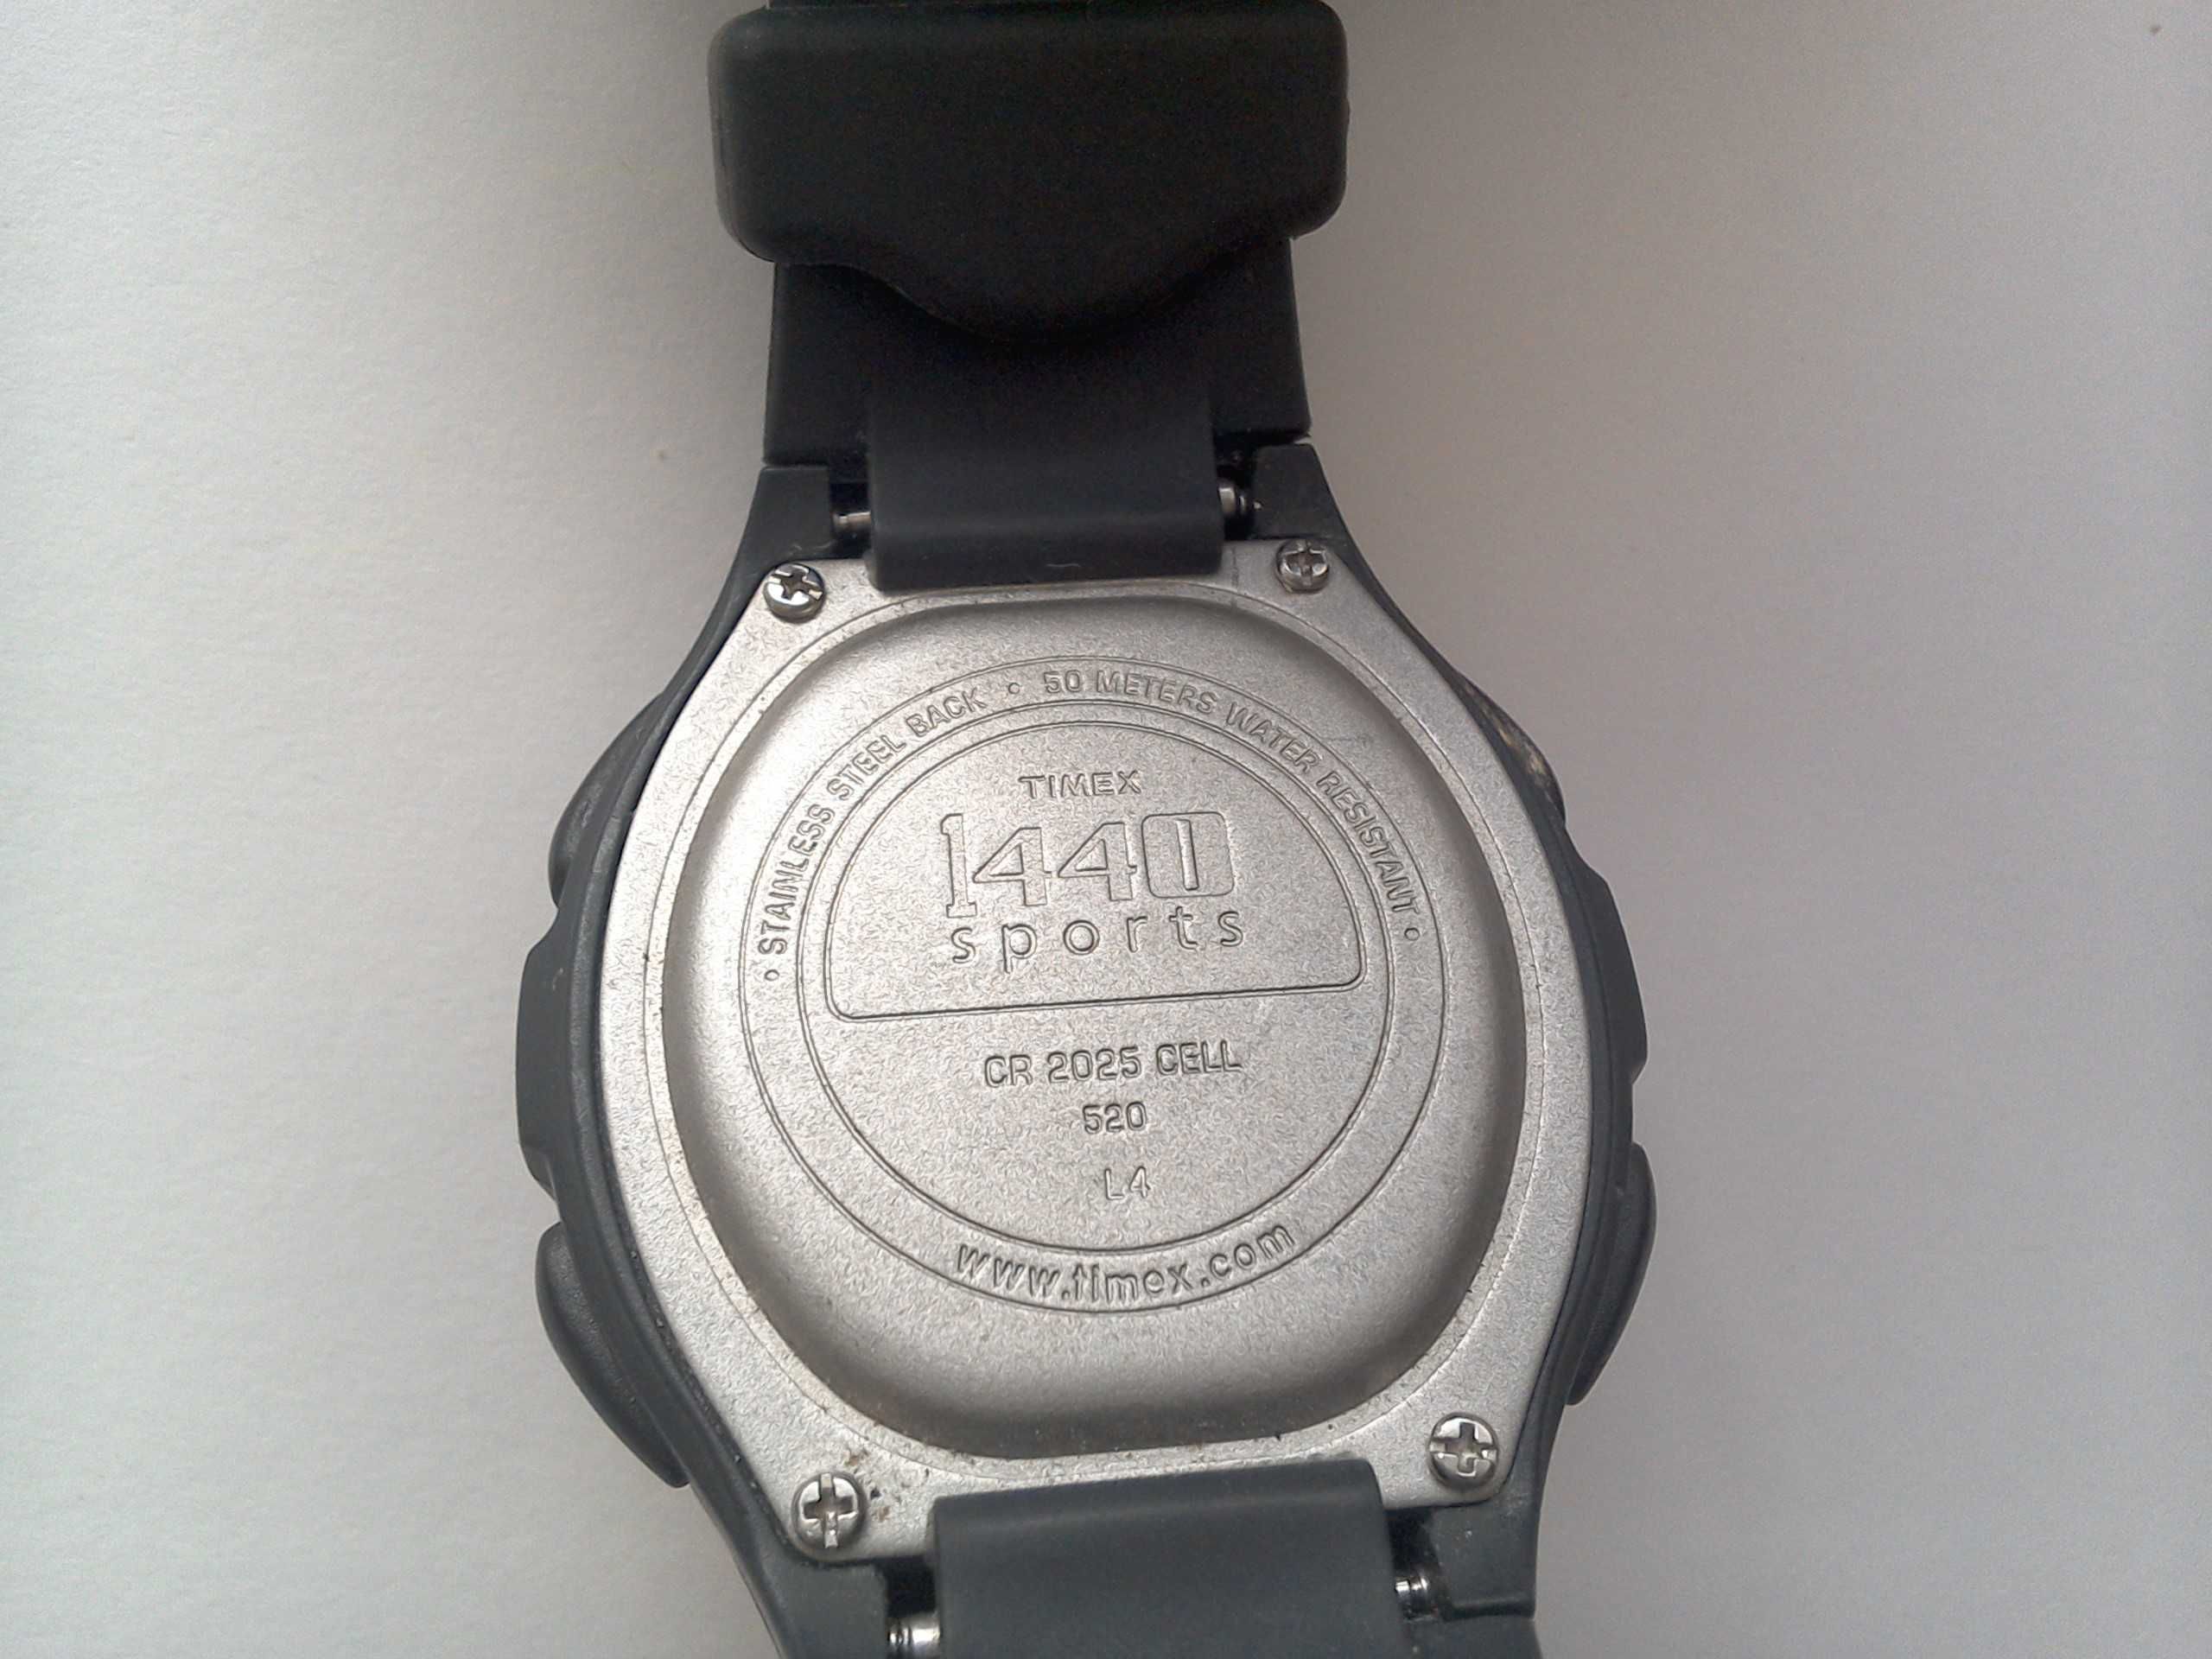 Ceas Timex 1440 - Sports, electronic - stare perfecta